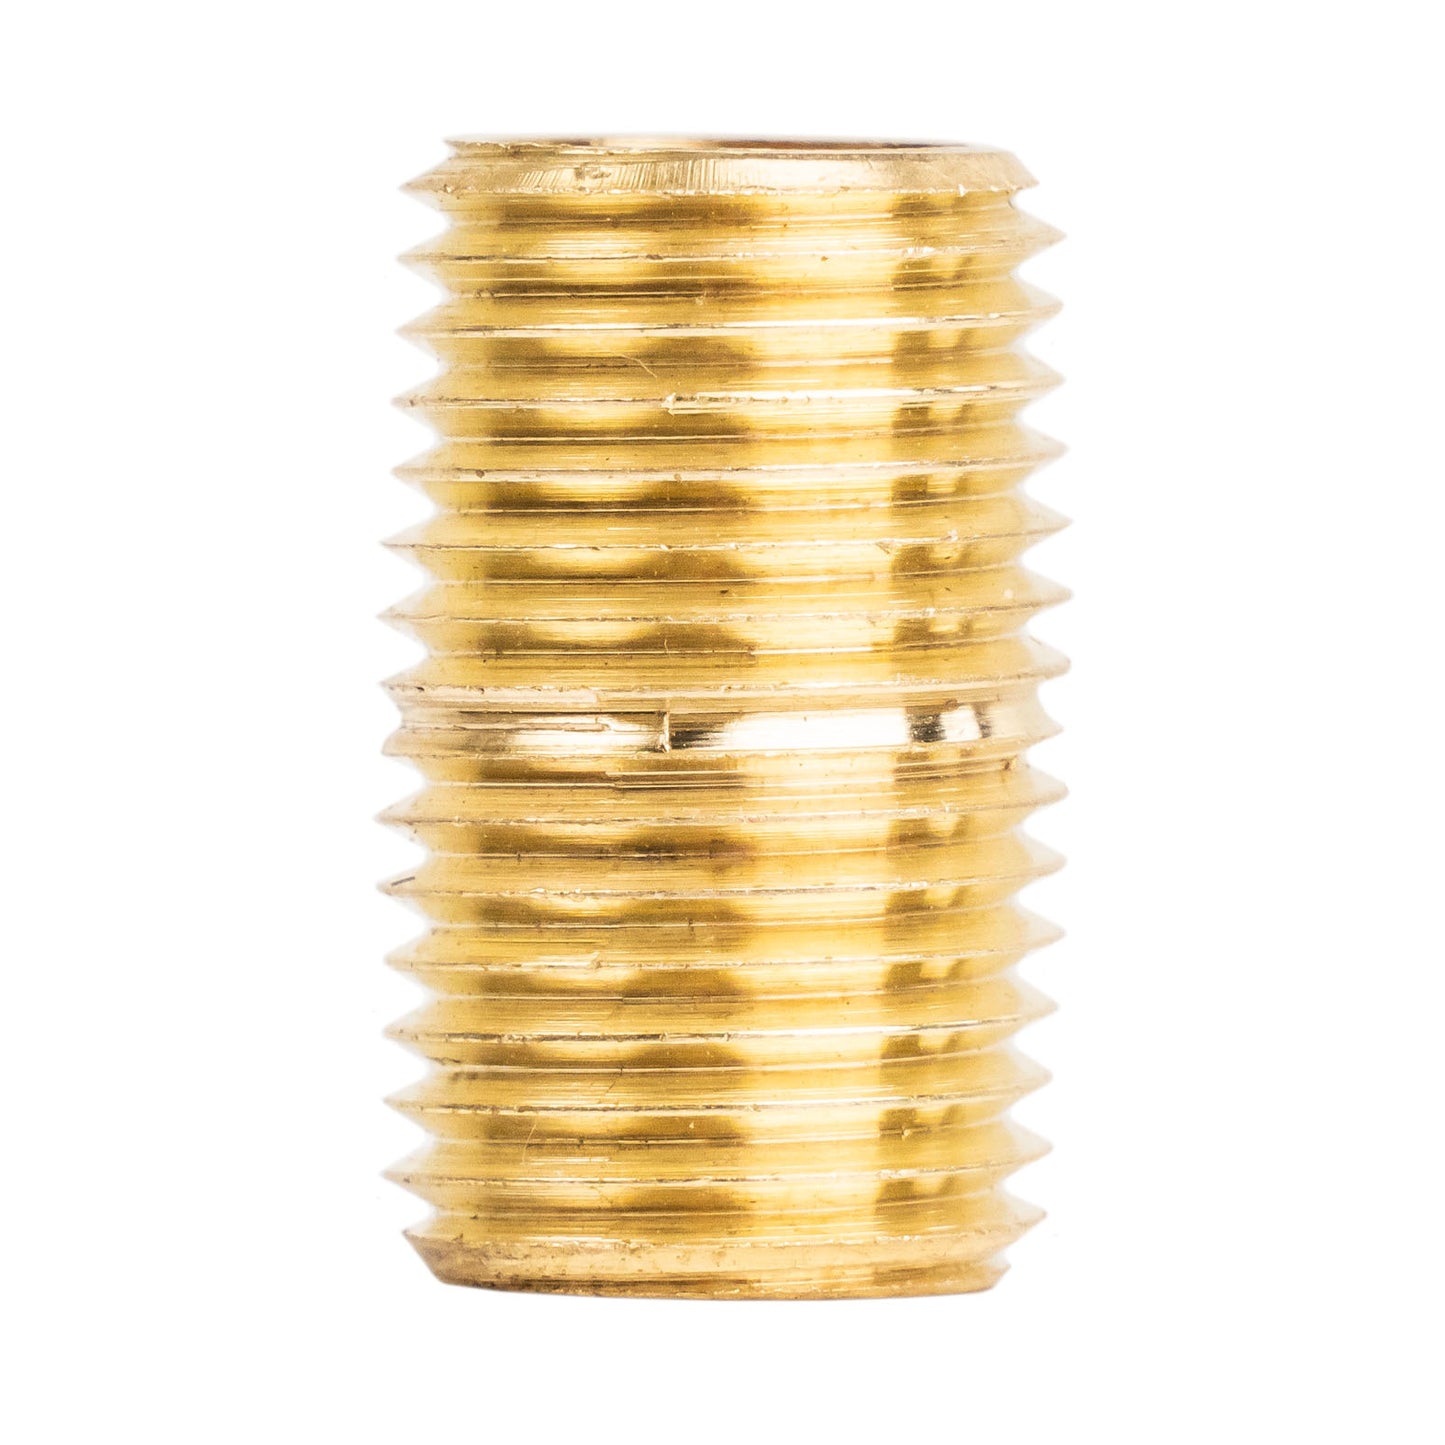 1/4" NPT X Male Close Pipe Nipple Threaded Brass Fitting Pipe Connector Brass